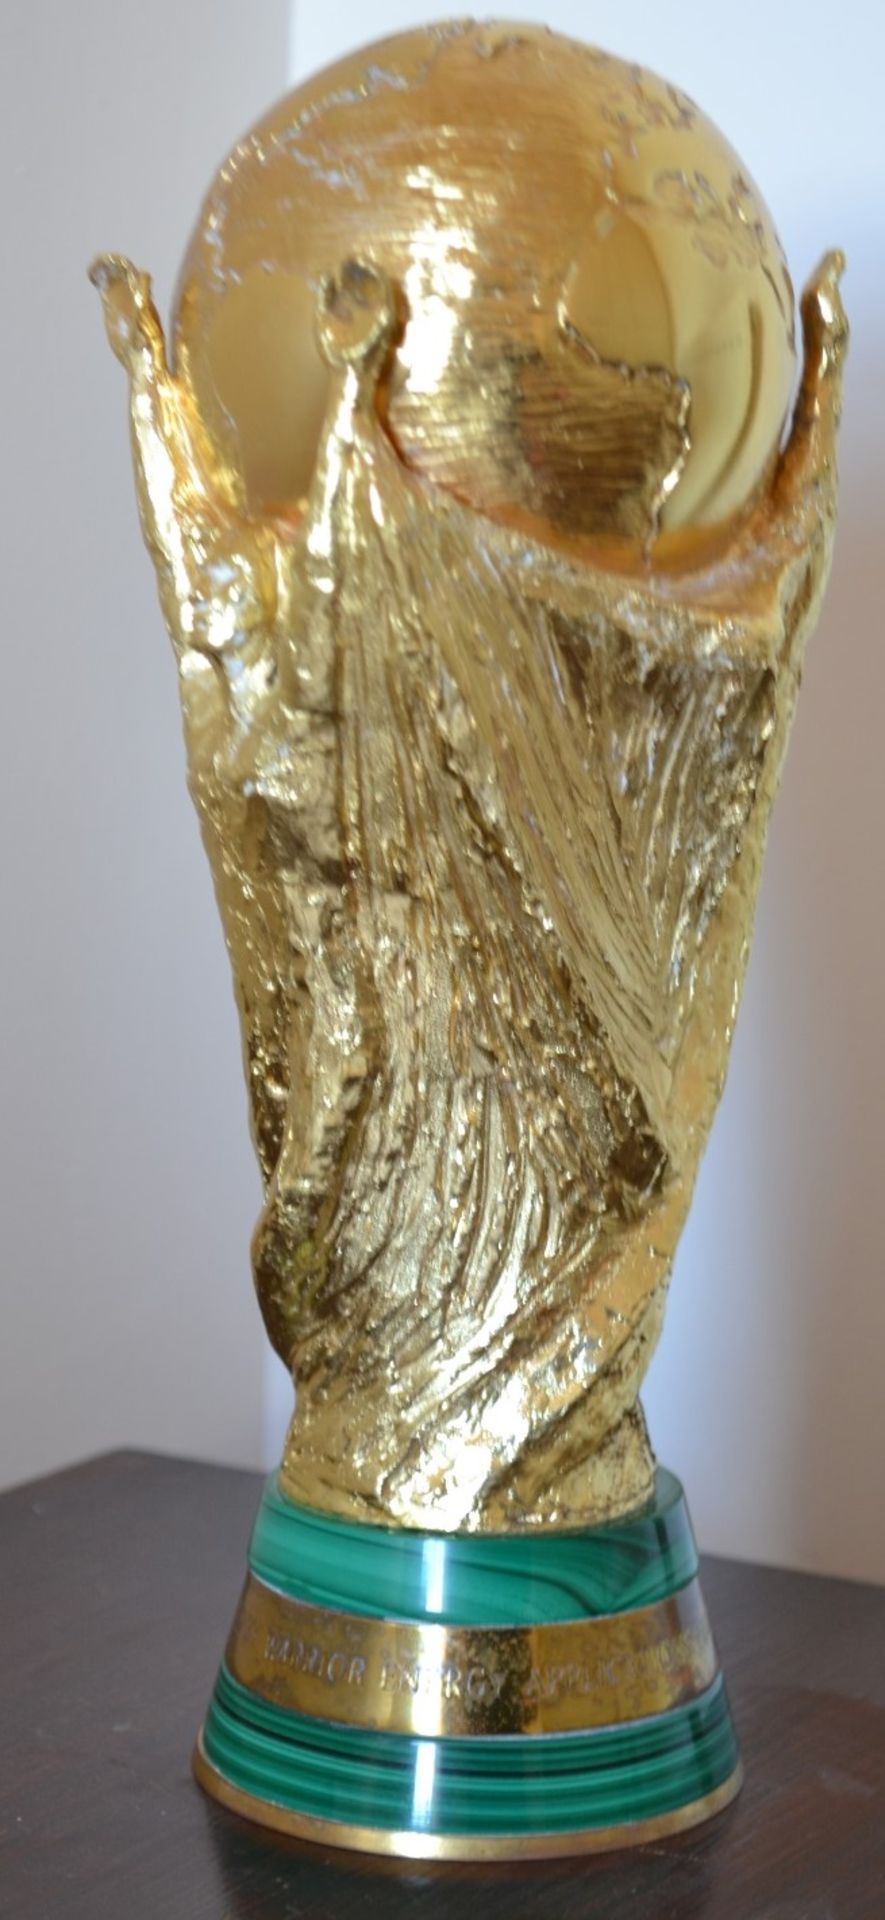 1 x Official World Cup 1:1.3 Scale 27cm Replica By Gerrard & Co. - Gold Plated - No.8 Of Only 10 - Image 11 of 16